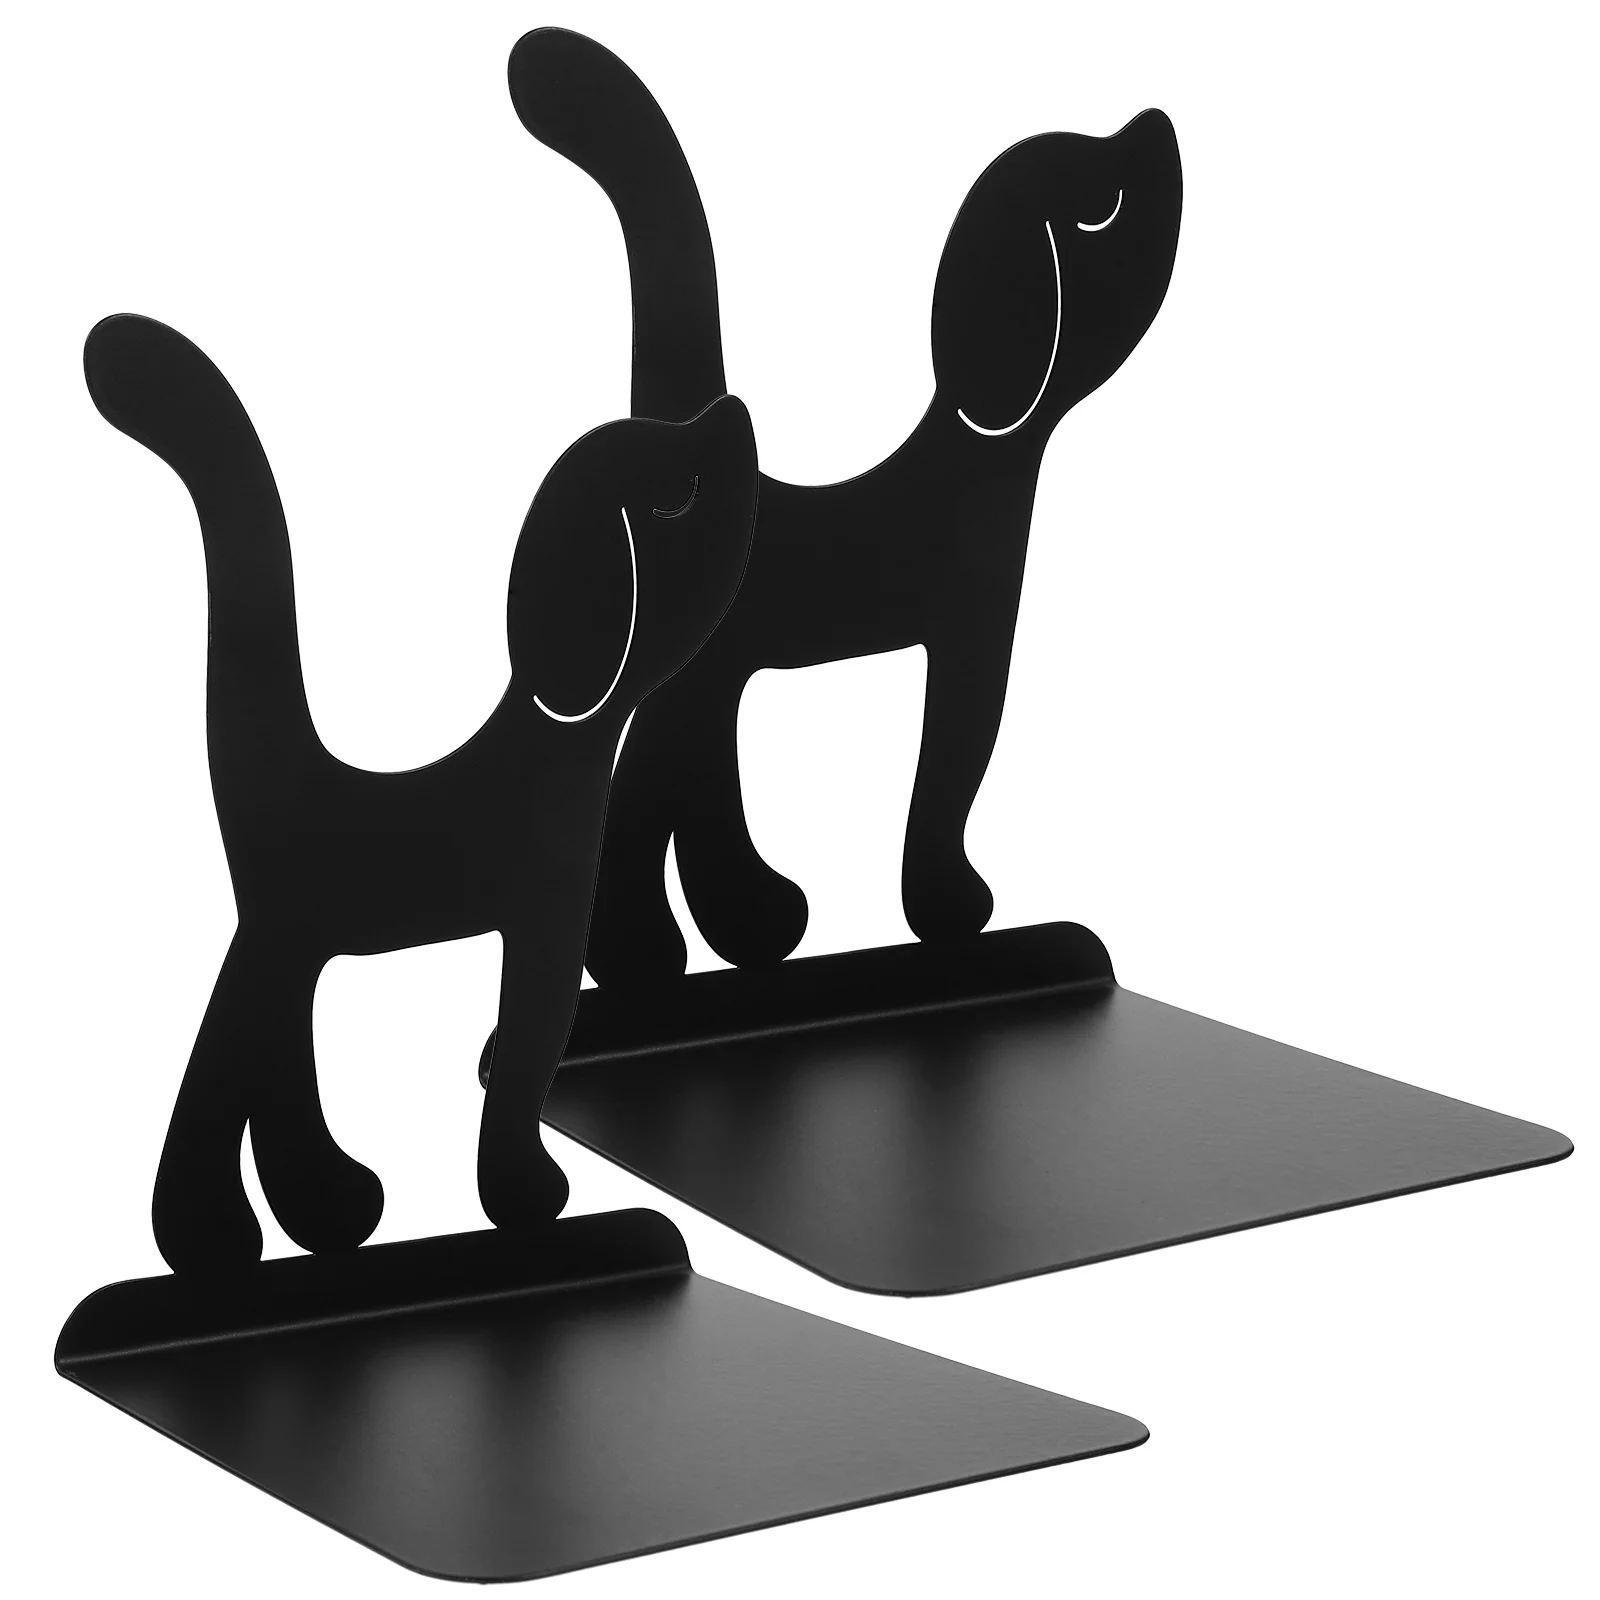 2 Pcs Bookend Stoppers Metal Bookends Shelves Organizer Decorative Support Holders Home Award Plate/Commemorative Books cat shape bookend books stand organizer for accesories support bookends non slip